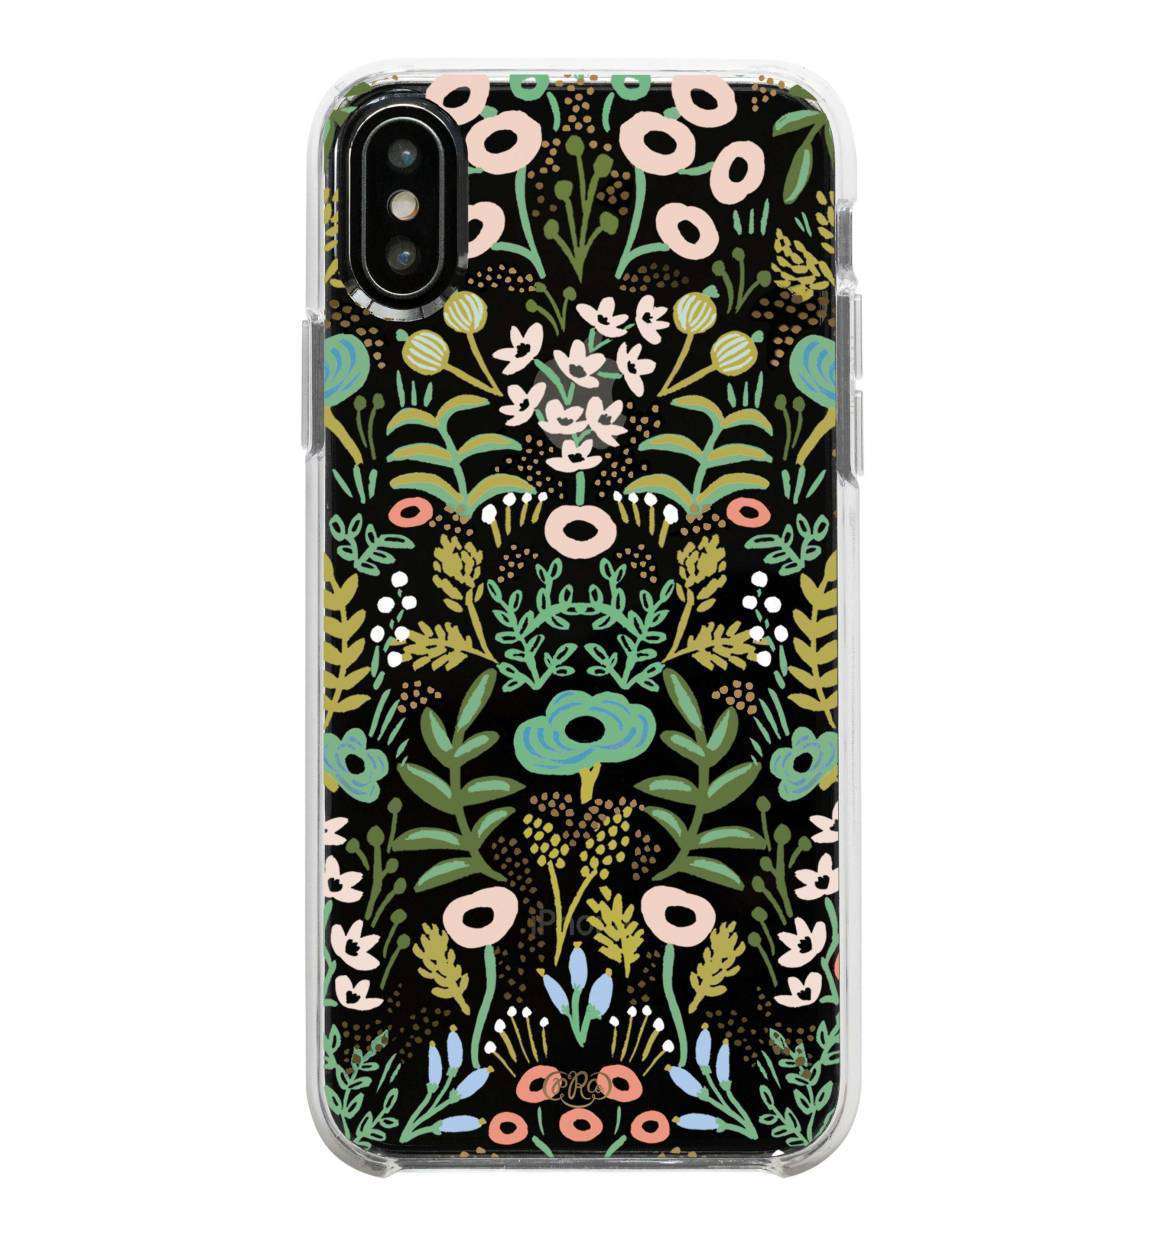 Modest women's boho print floral pink green mint gold iPhone cover